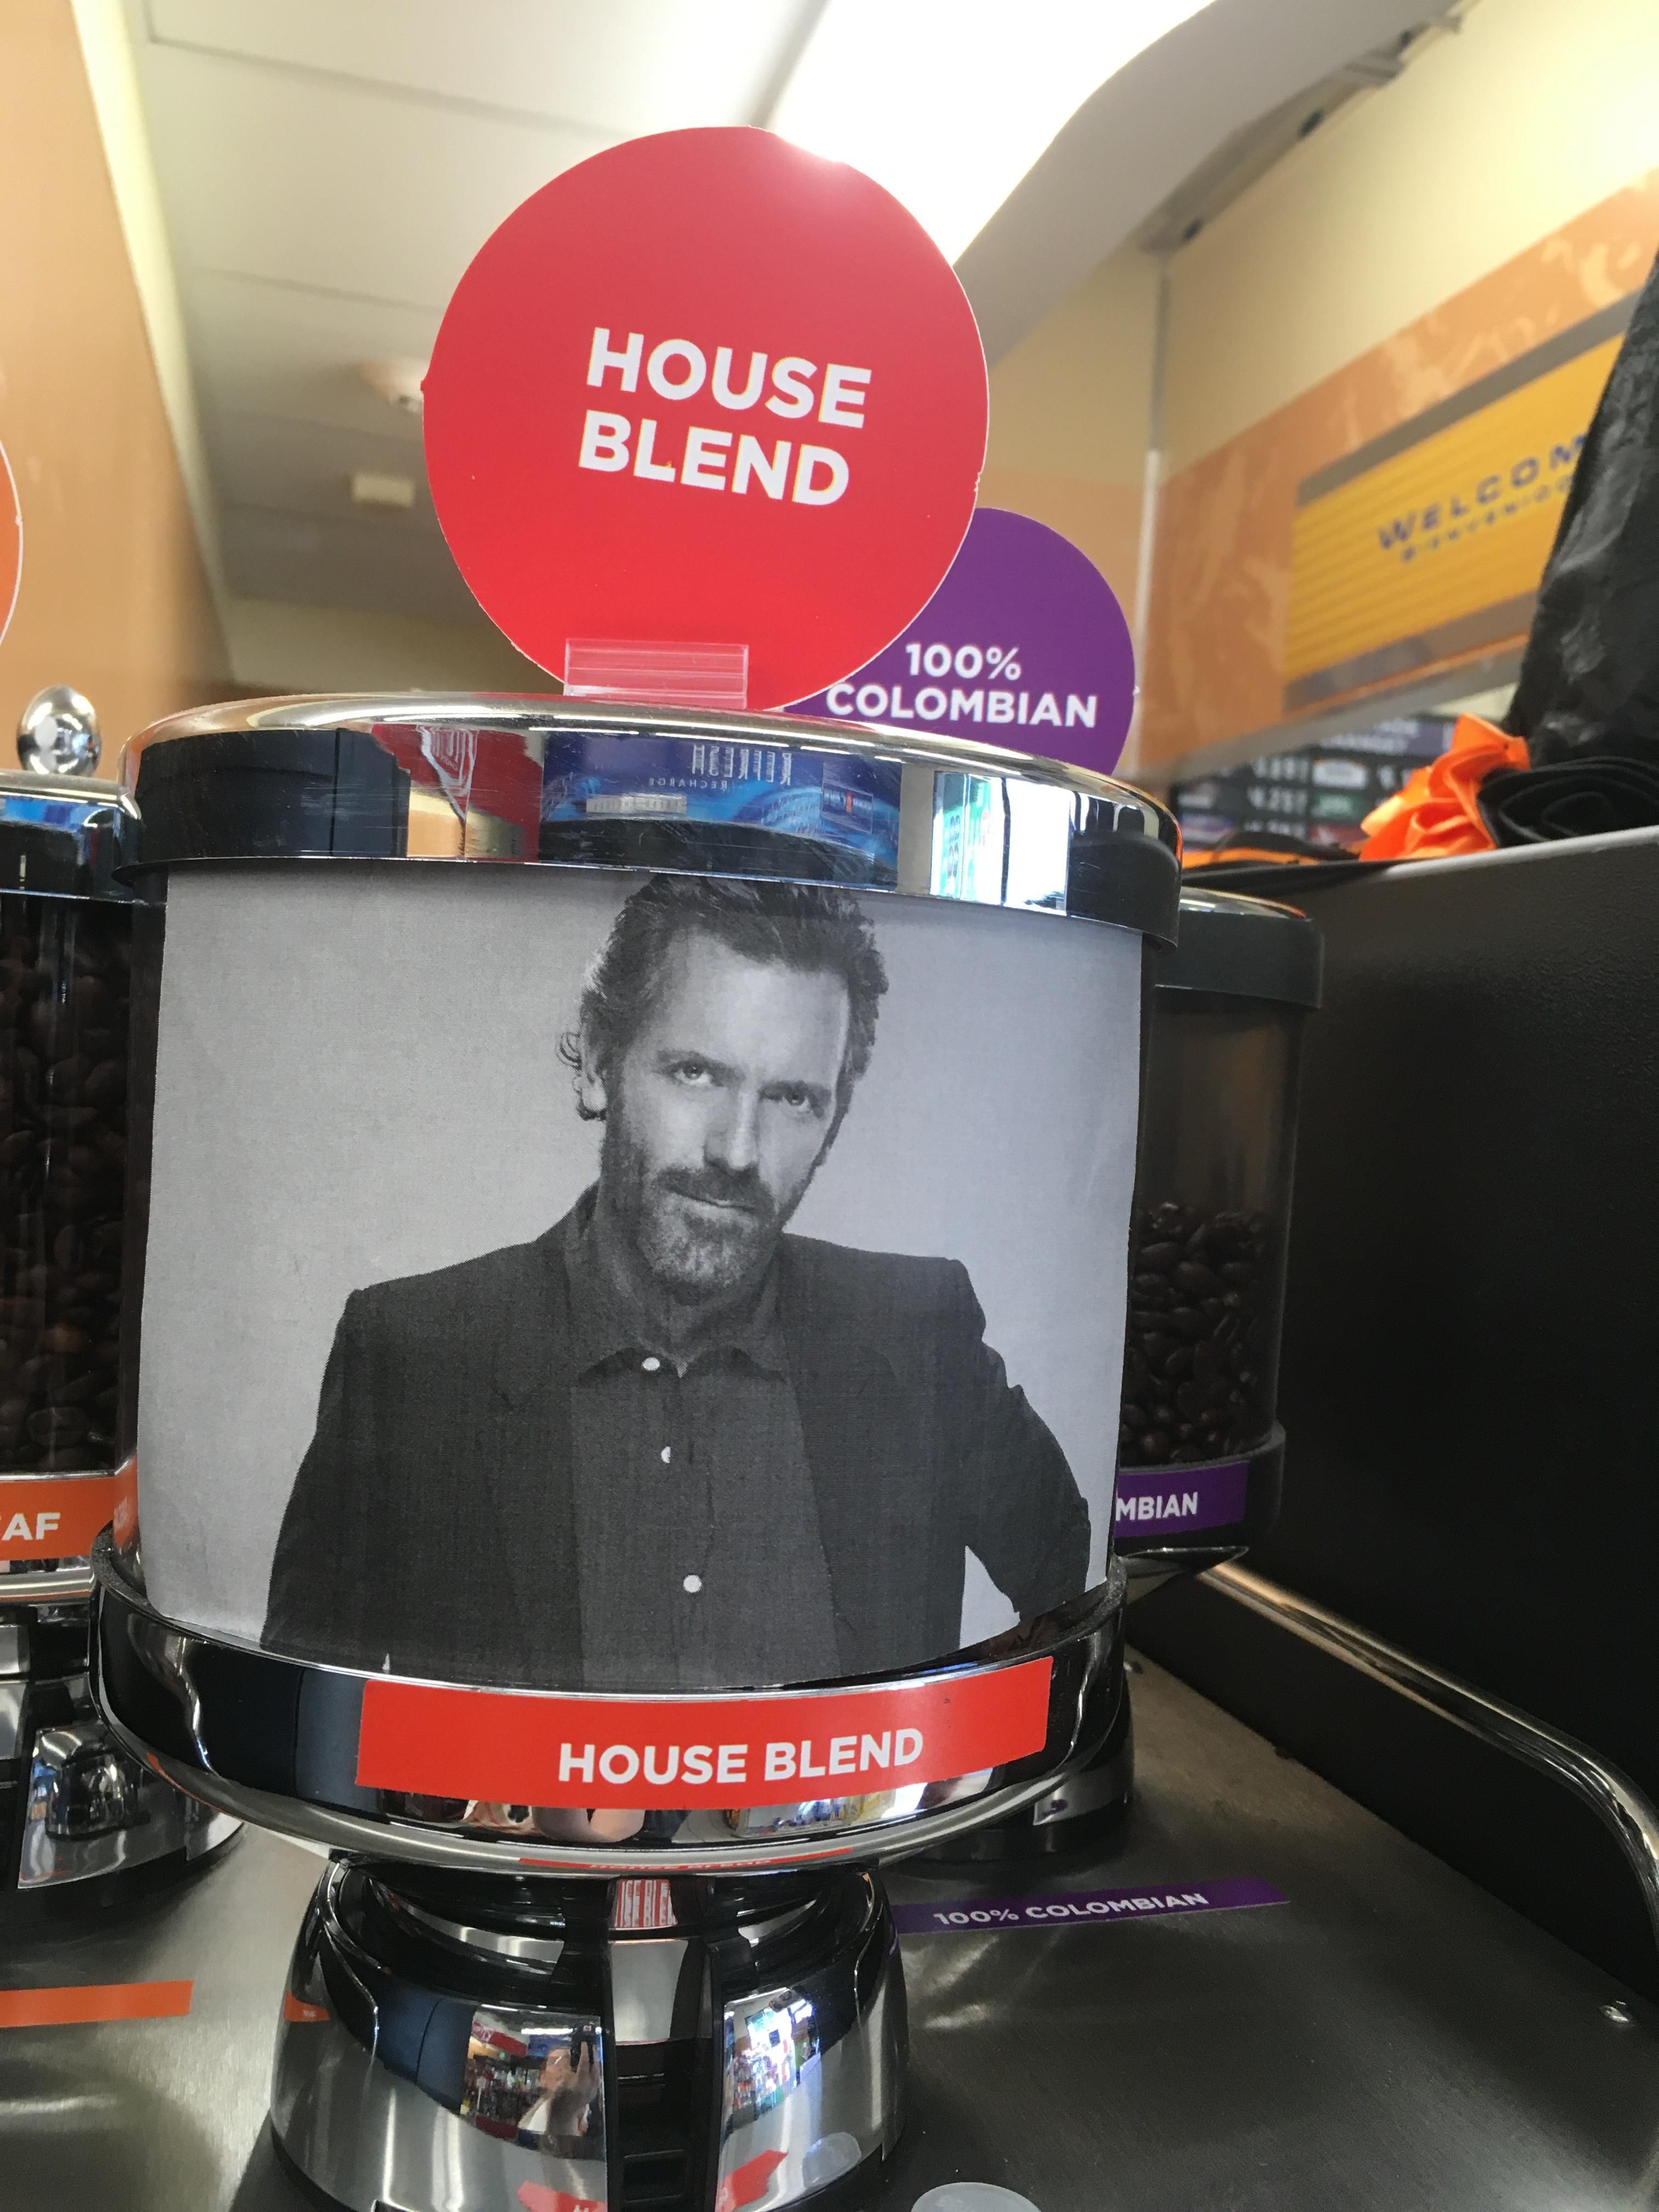 The House Blend at my local gas station.